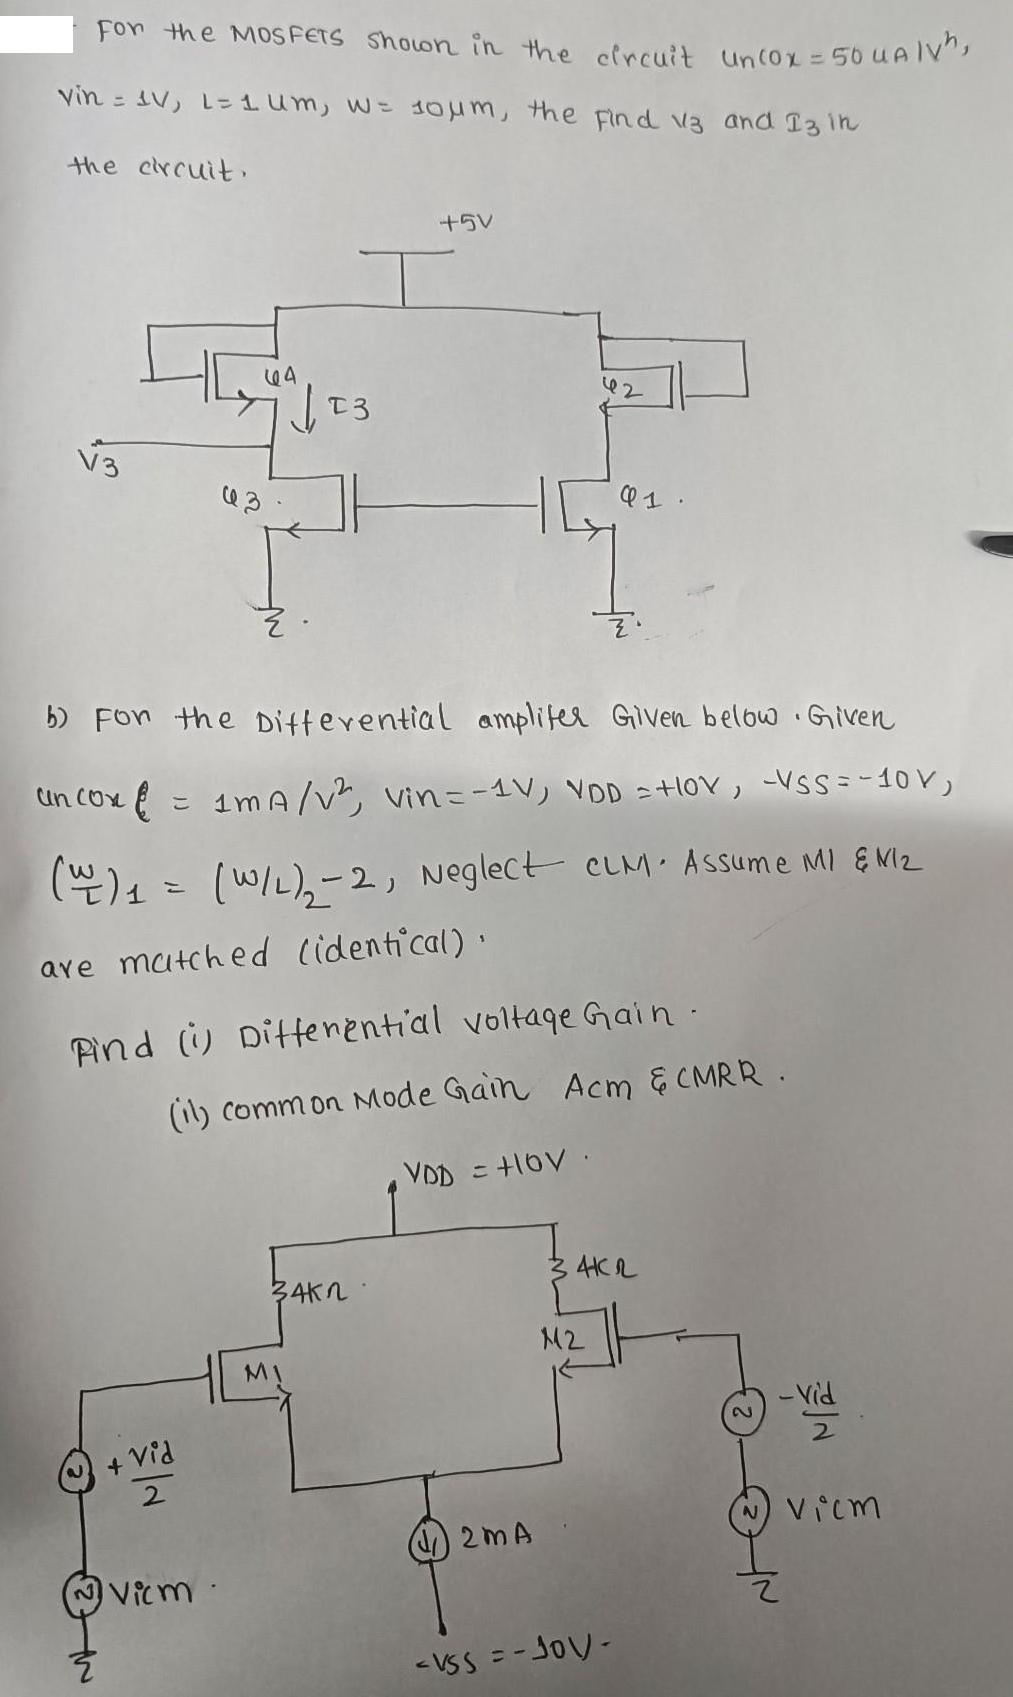 For the MOSFETS shown in the circuit un cox = 50 UAIV